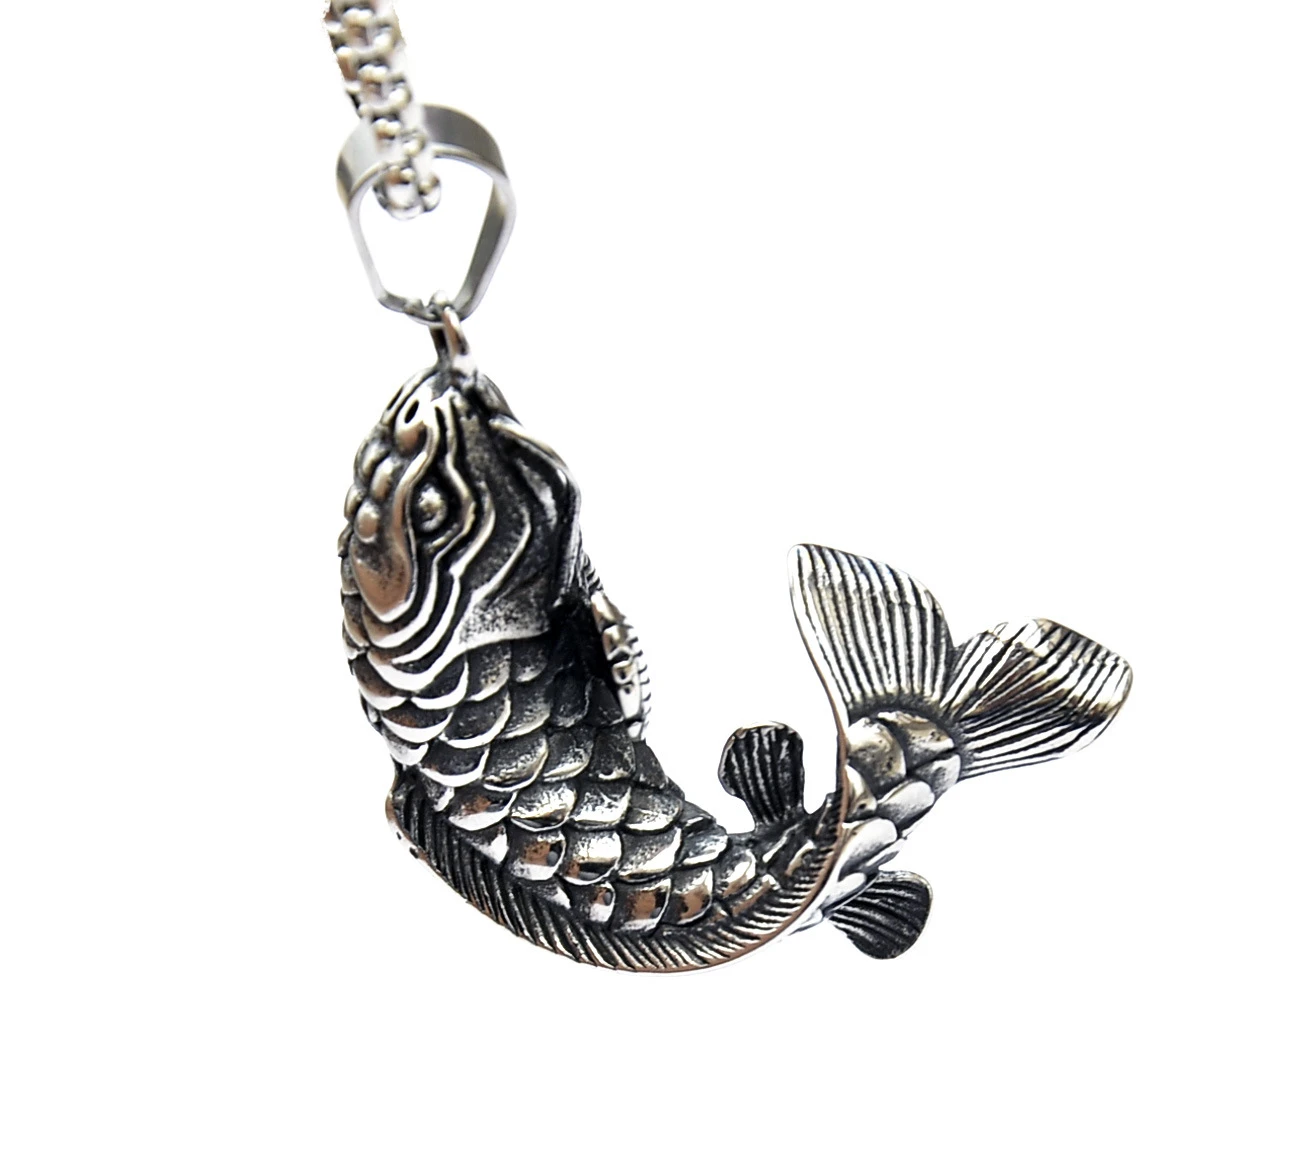 Stainless Steel Jewelry Making | Fish Pendant Necklace Koi | Stainless  Steel Pendant - Pendants - Aliexpress